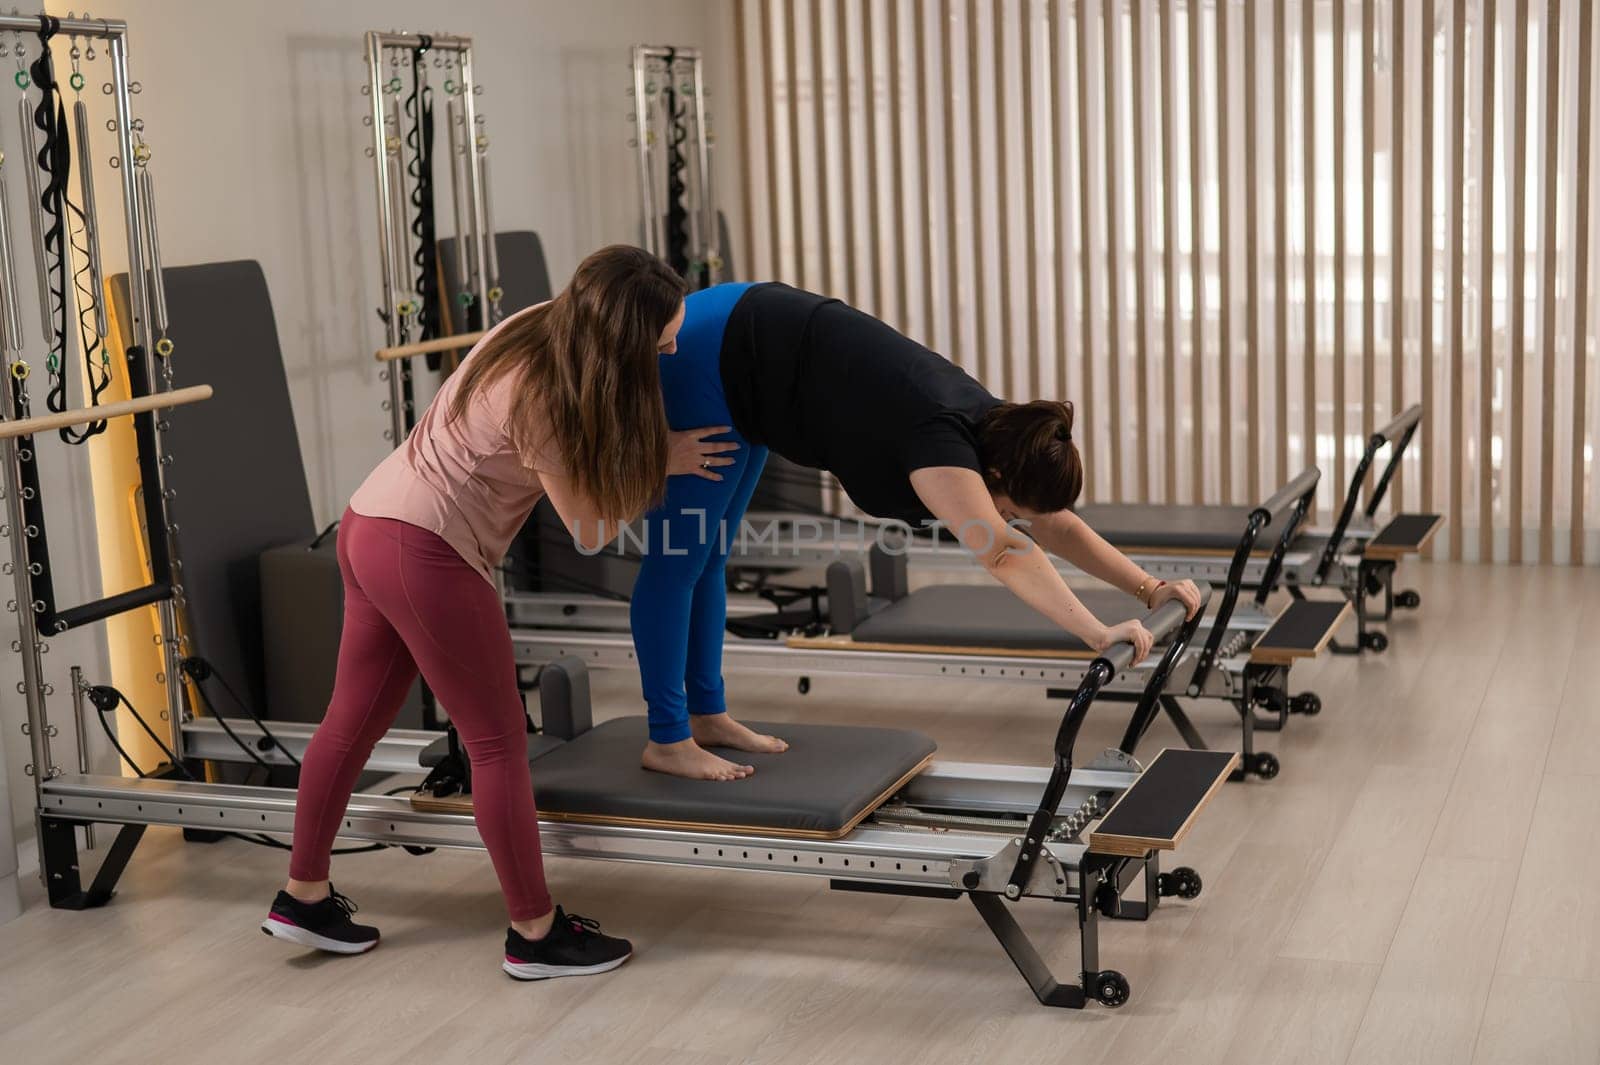 Overweight caucasian woman doing pilates exercises on reformer with personal trainer